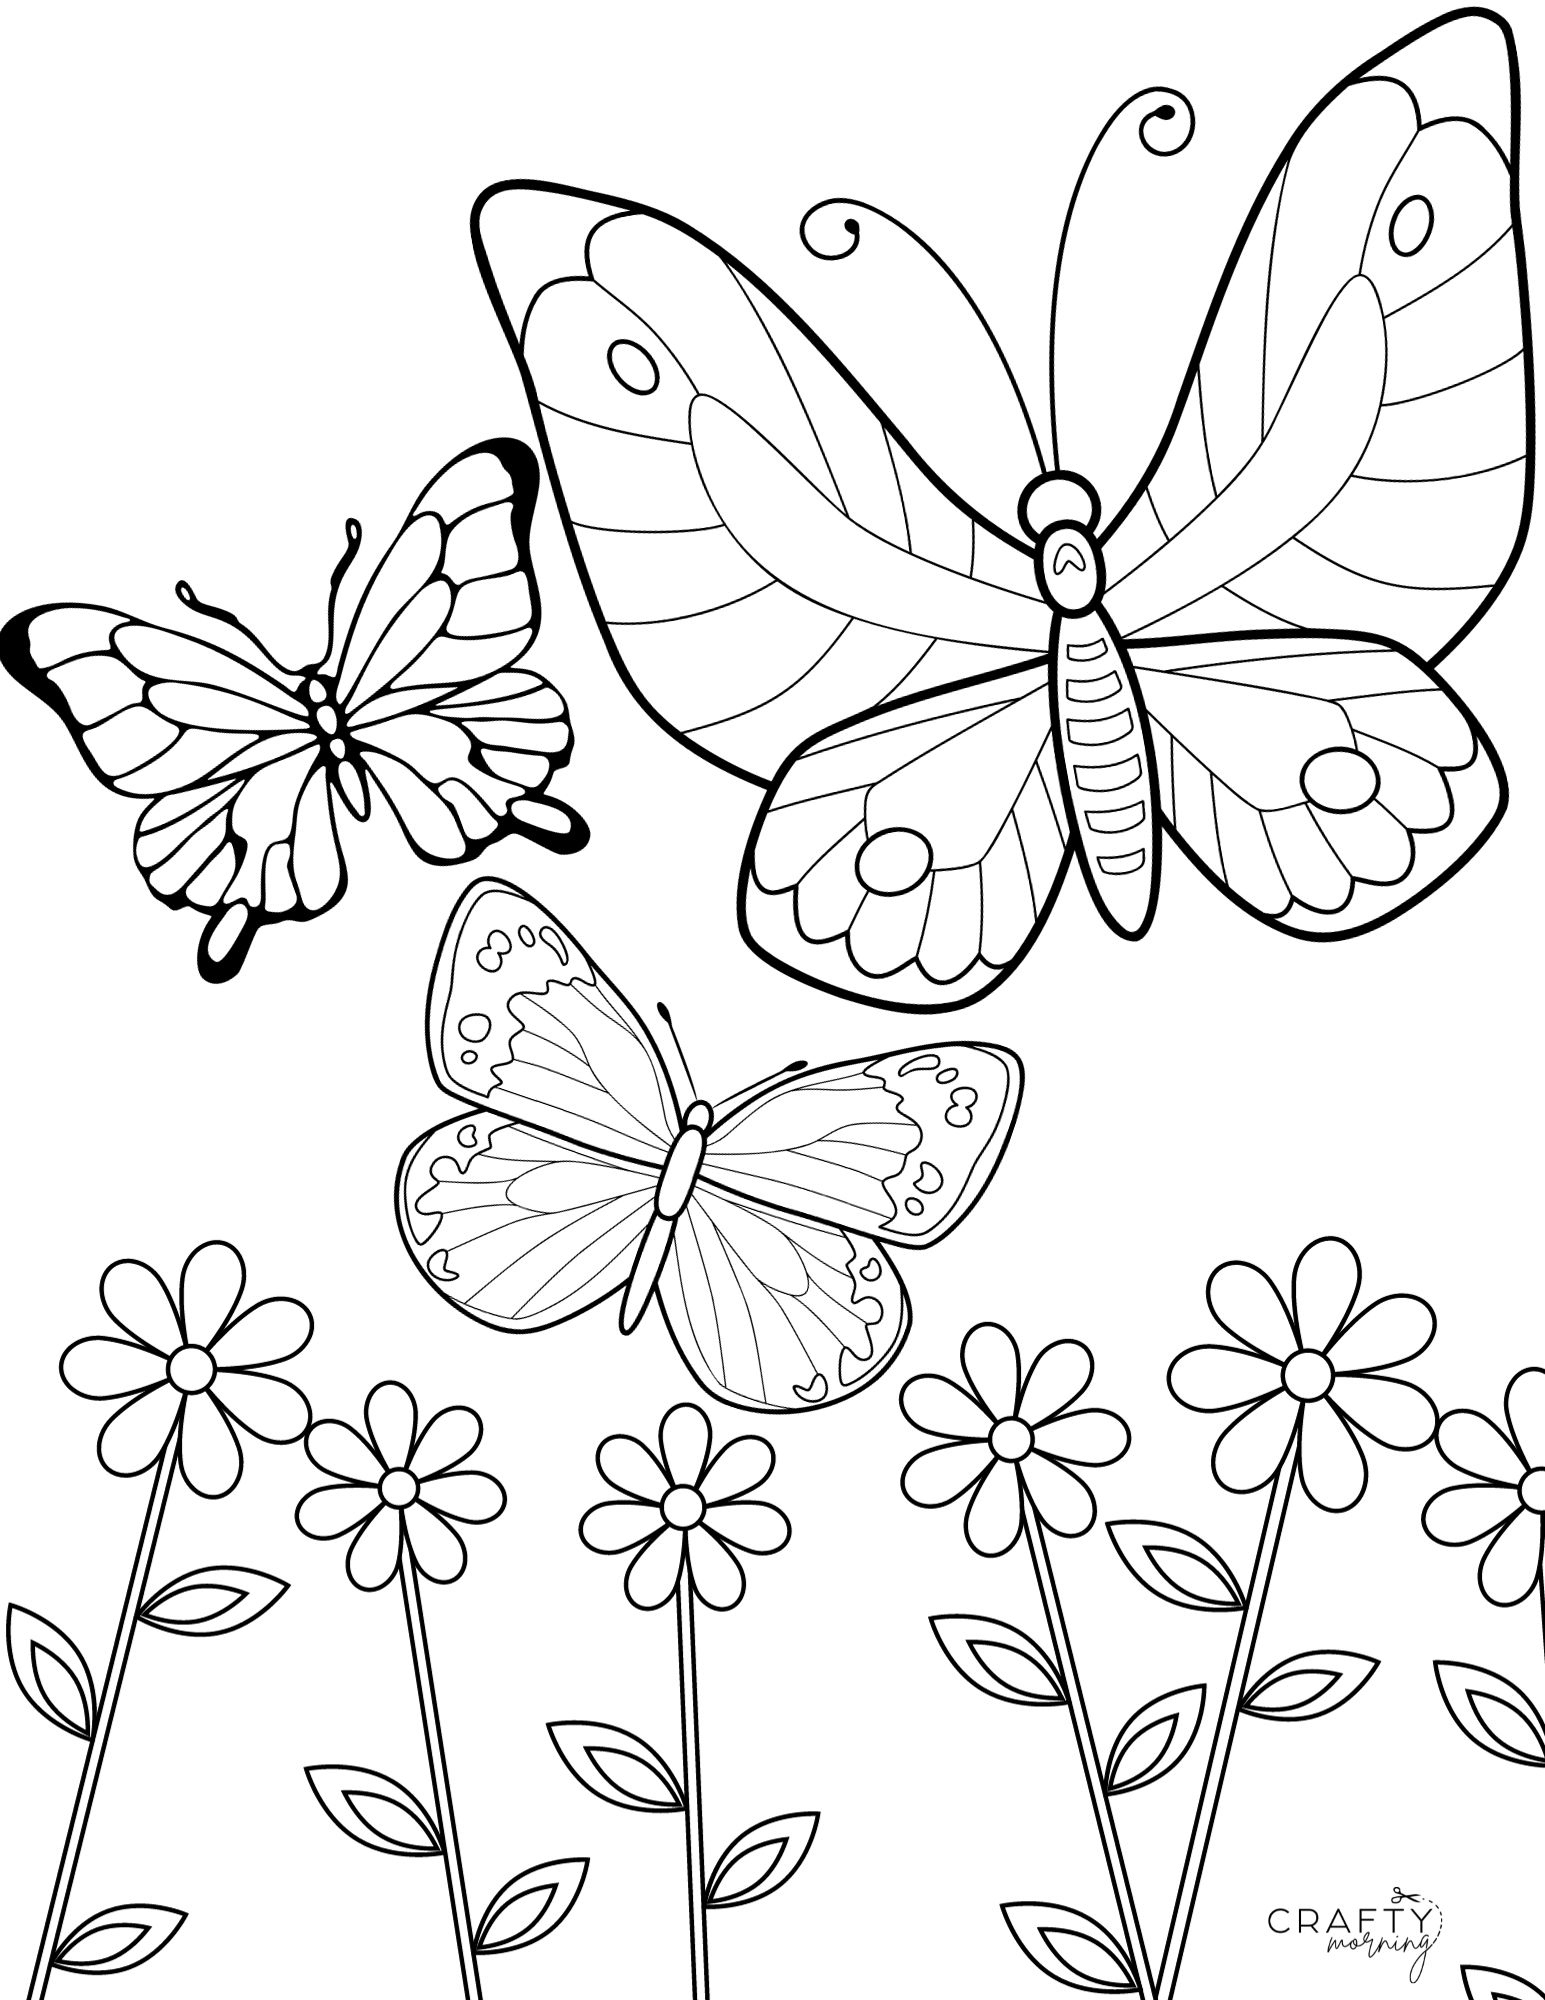 Free Butterfly Coloring Pages To Print - Crafty Morning in Butterfly Free Printable Coloring Pages